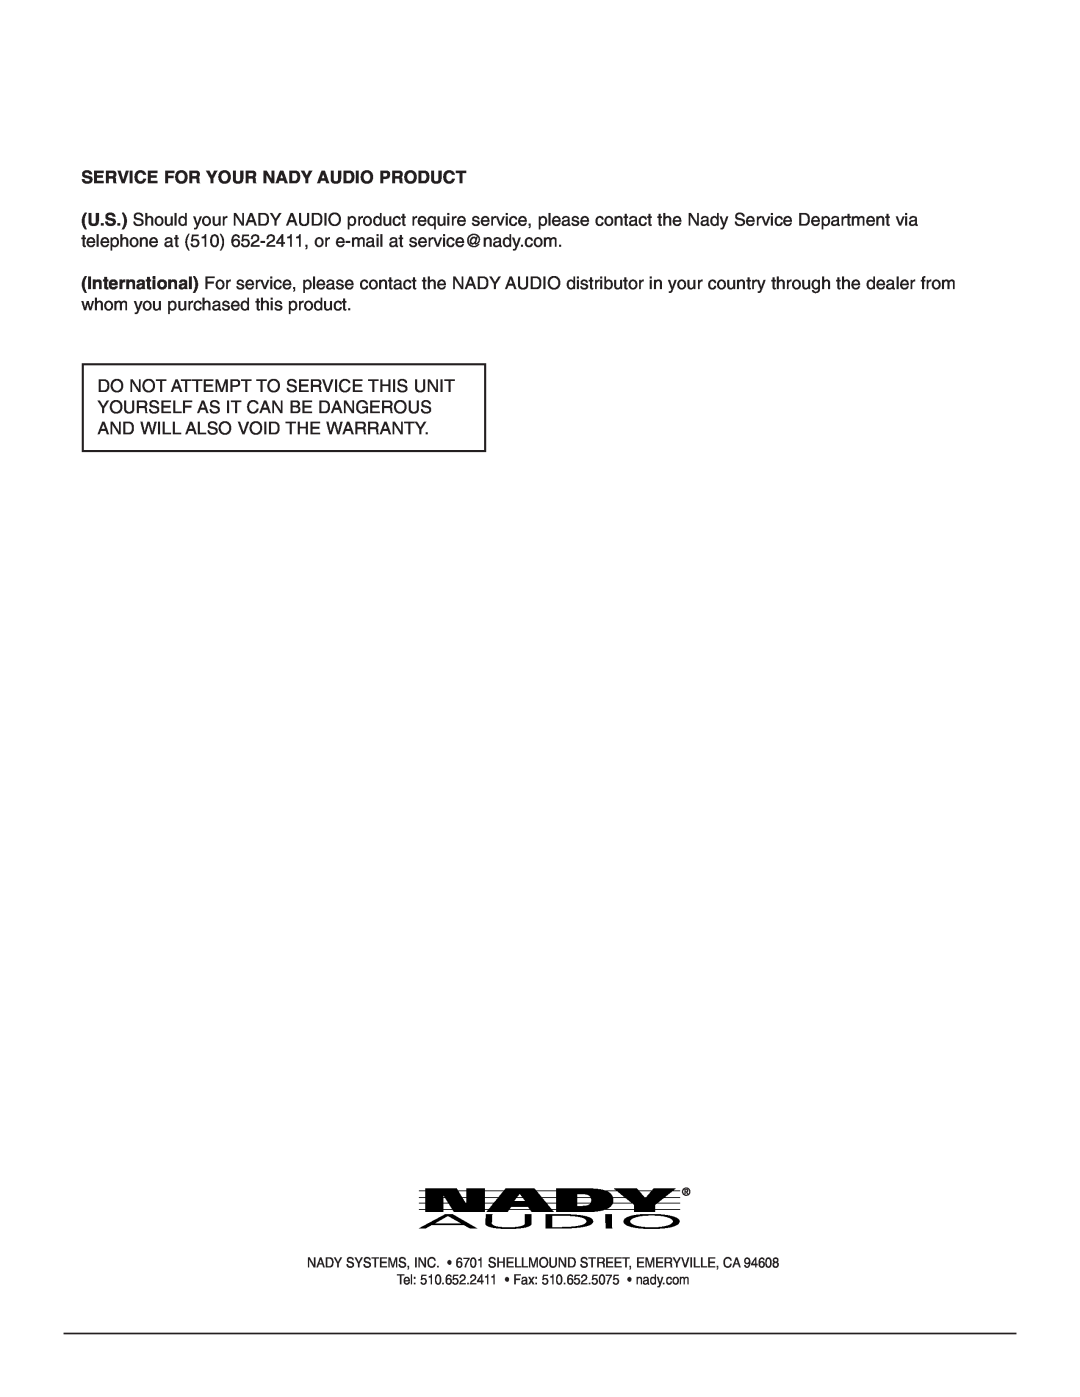 Nady Systems PPA-300 owner manual Service For Your Nady Audio Product 